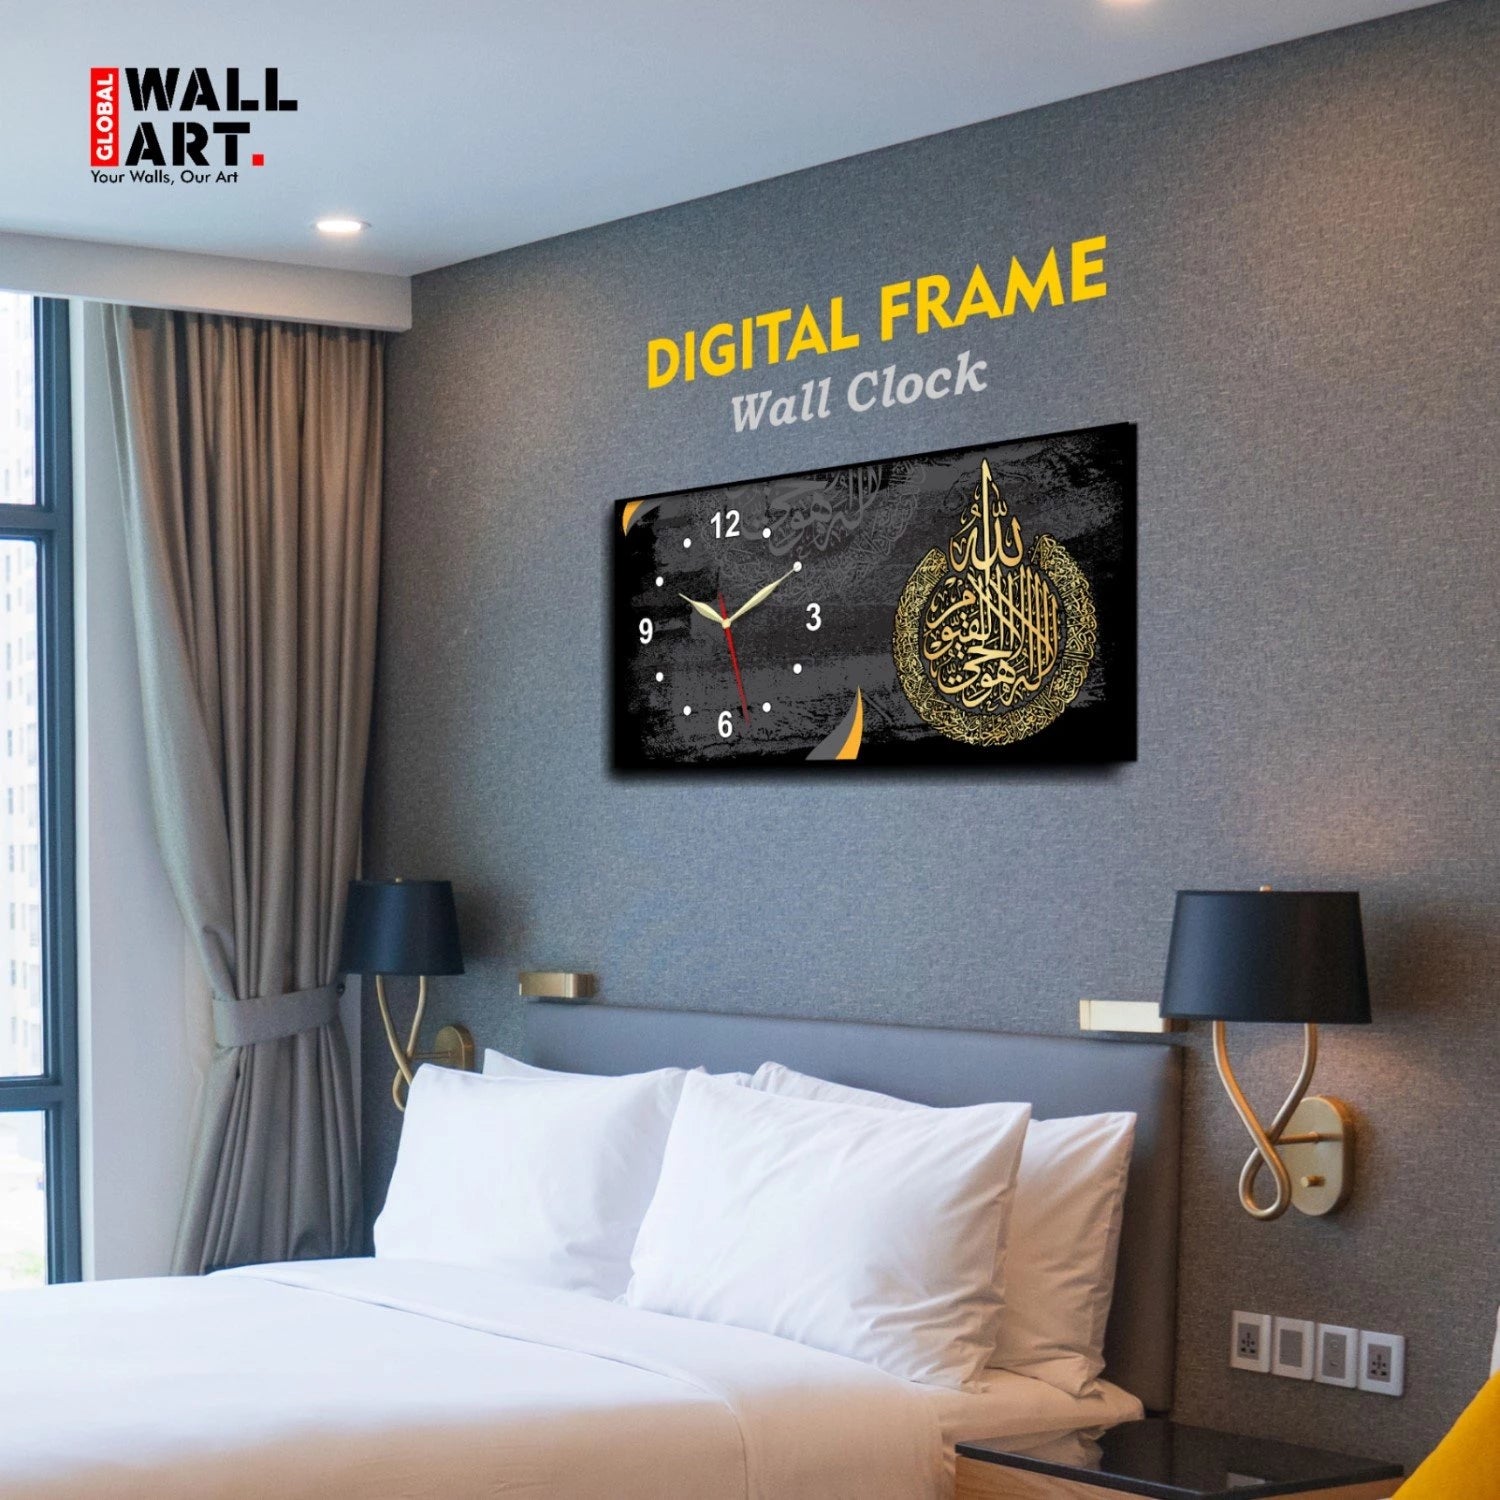 Islamic Digital Printing Wall Clock Frame Best for House and Office